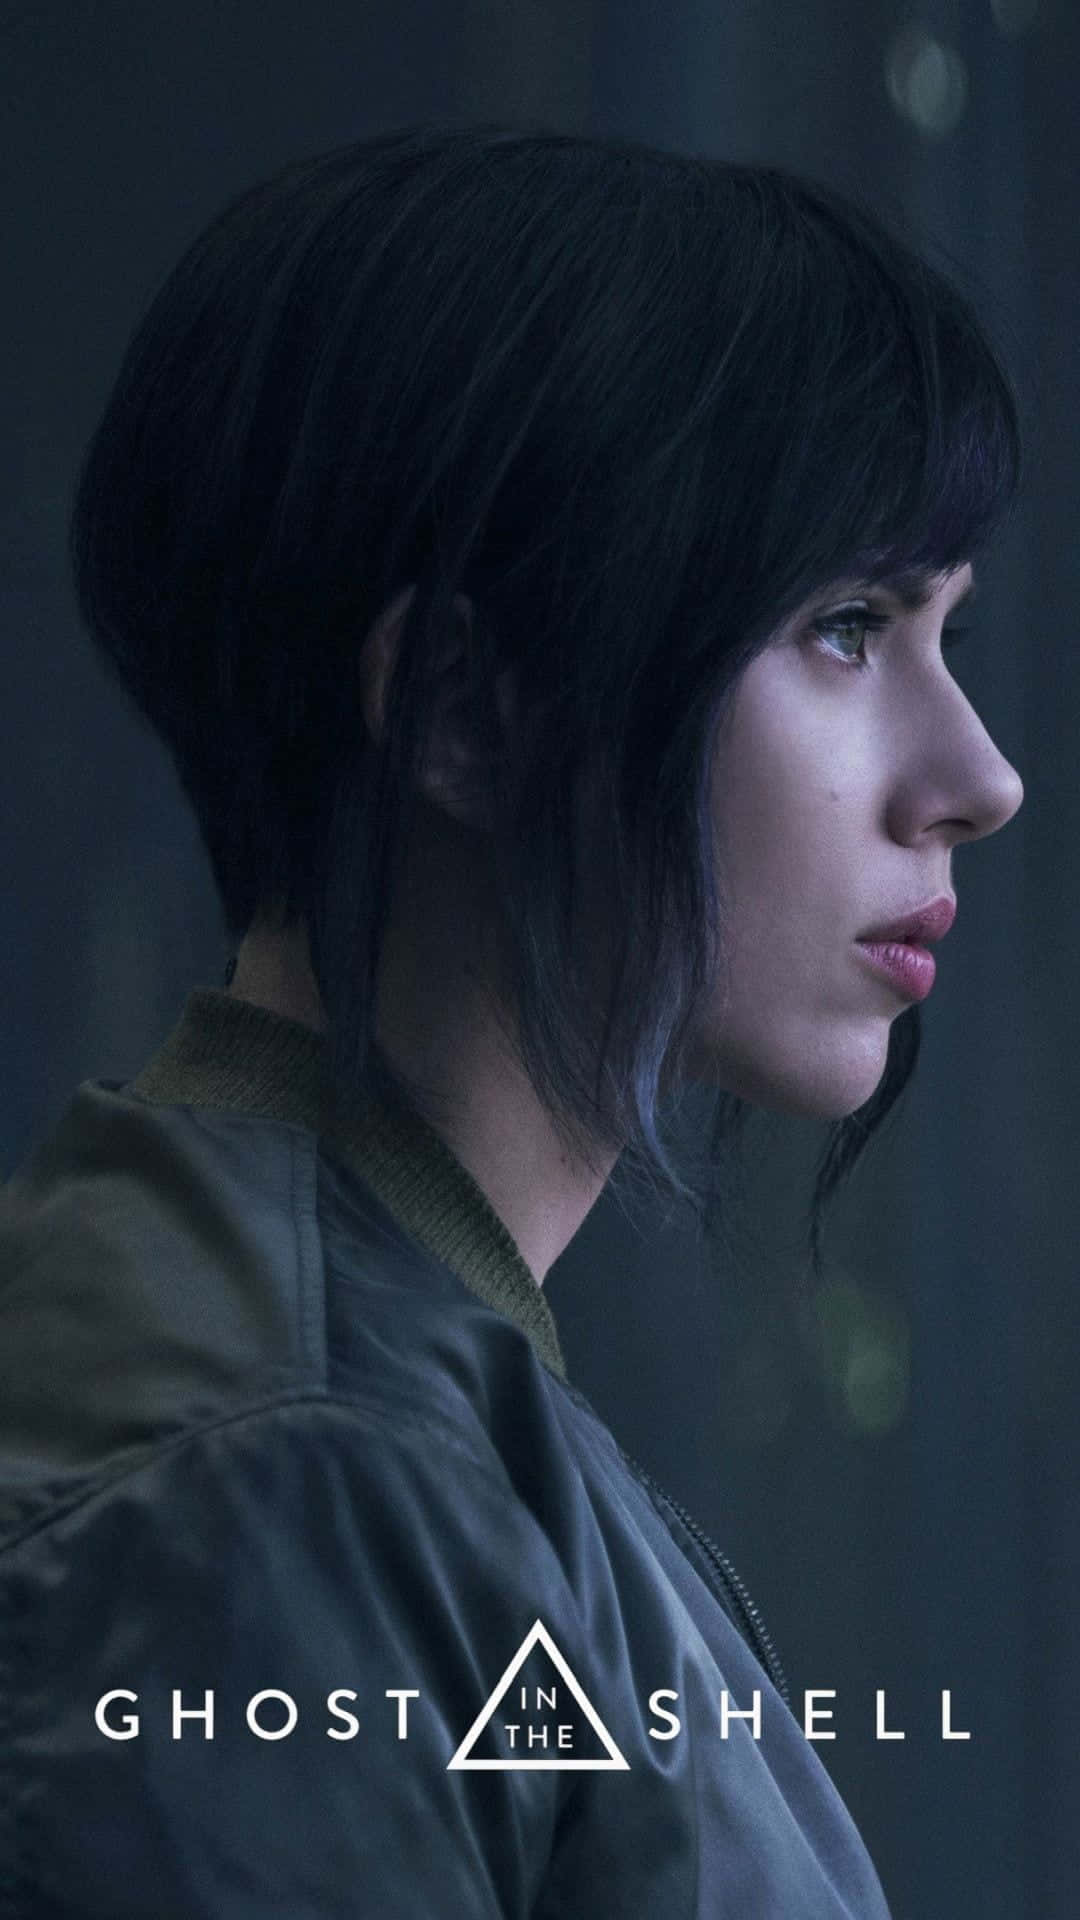 Explore new possibilities with Ghost in the Shell.